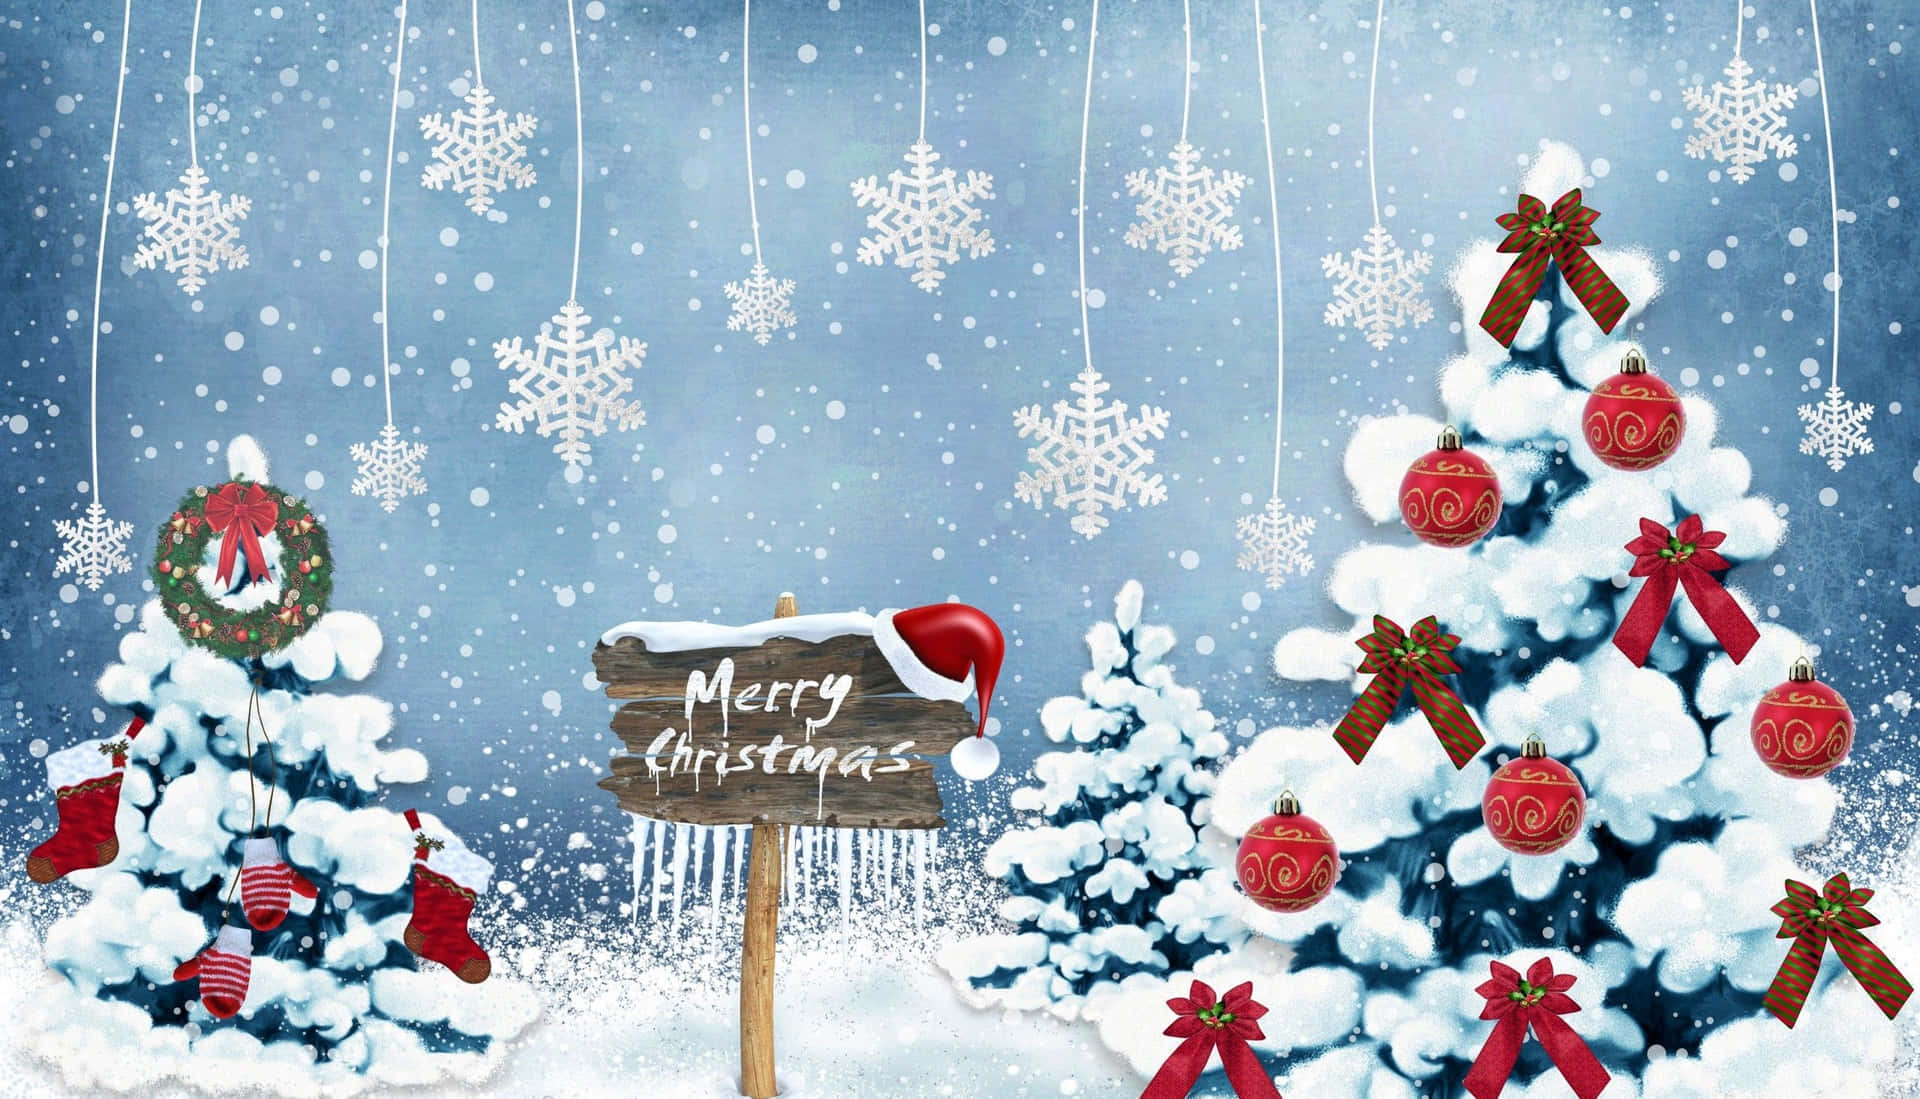 Festive And Cool Christmas Wallpaper Background